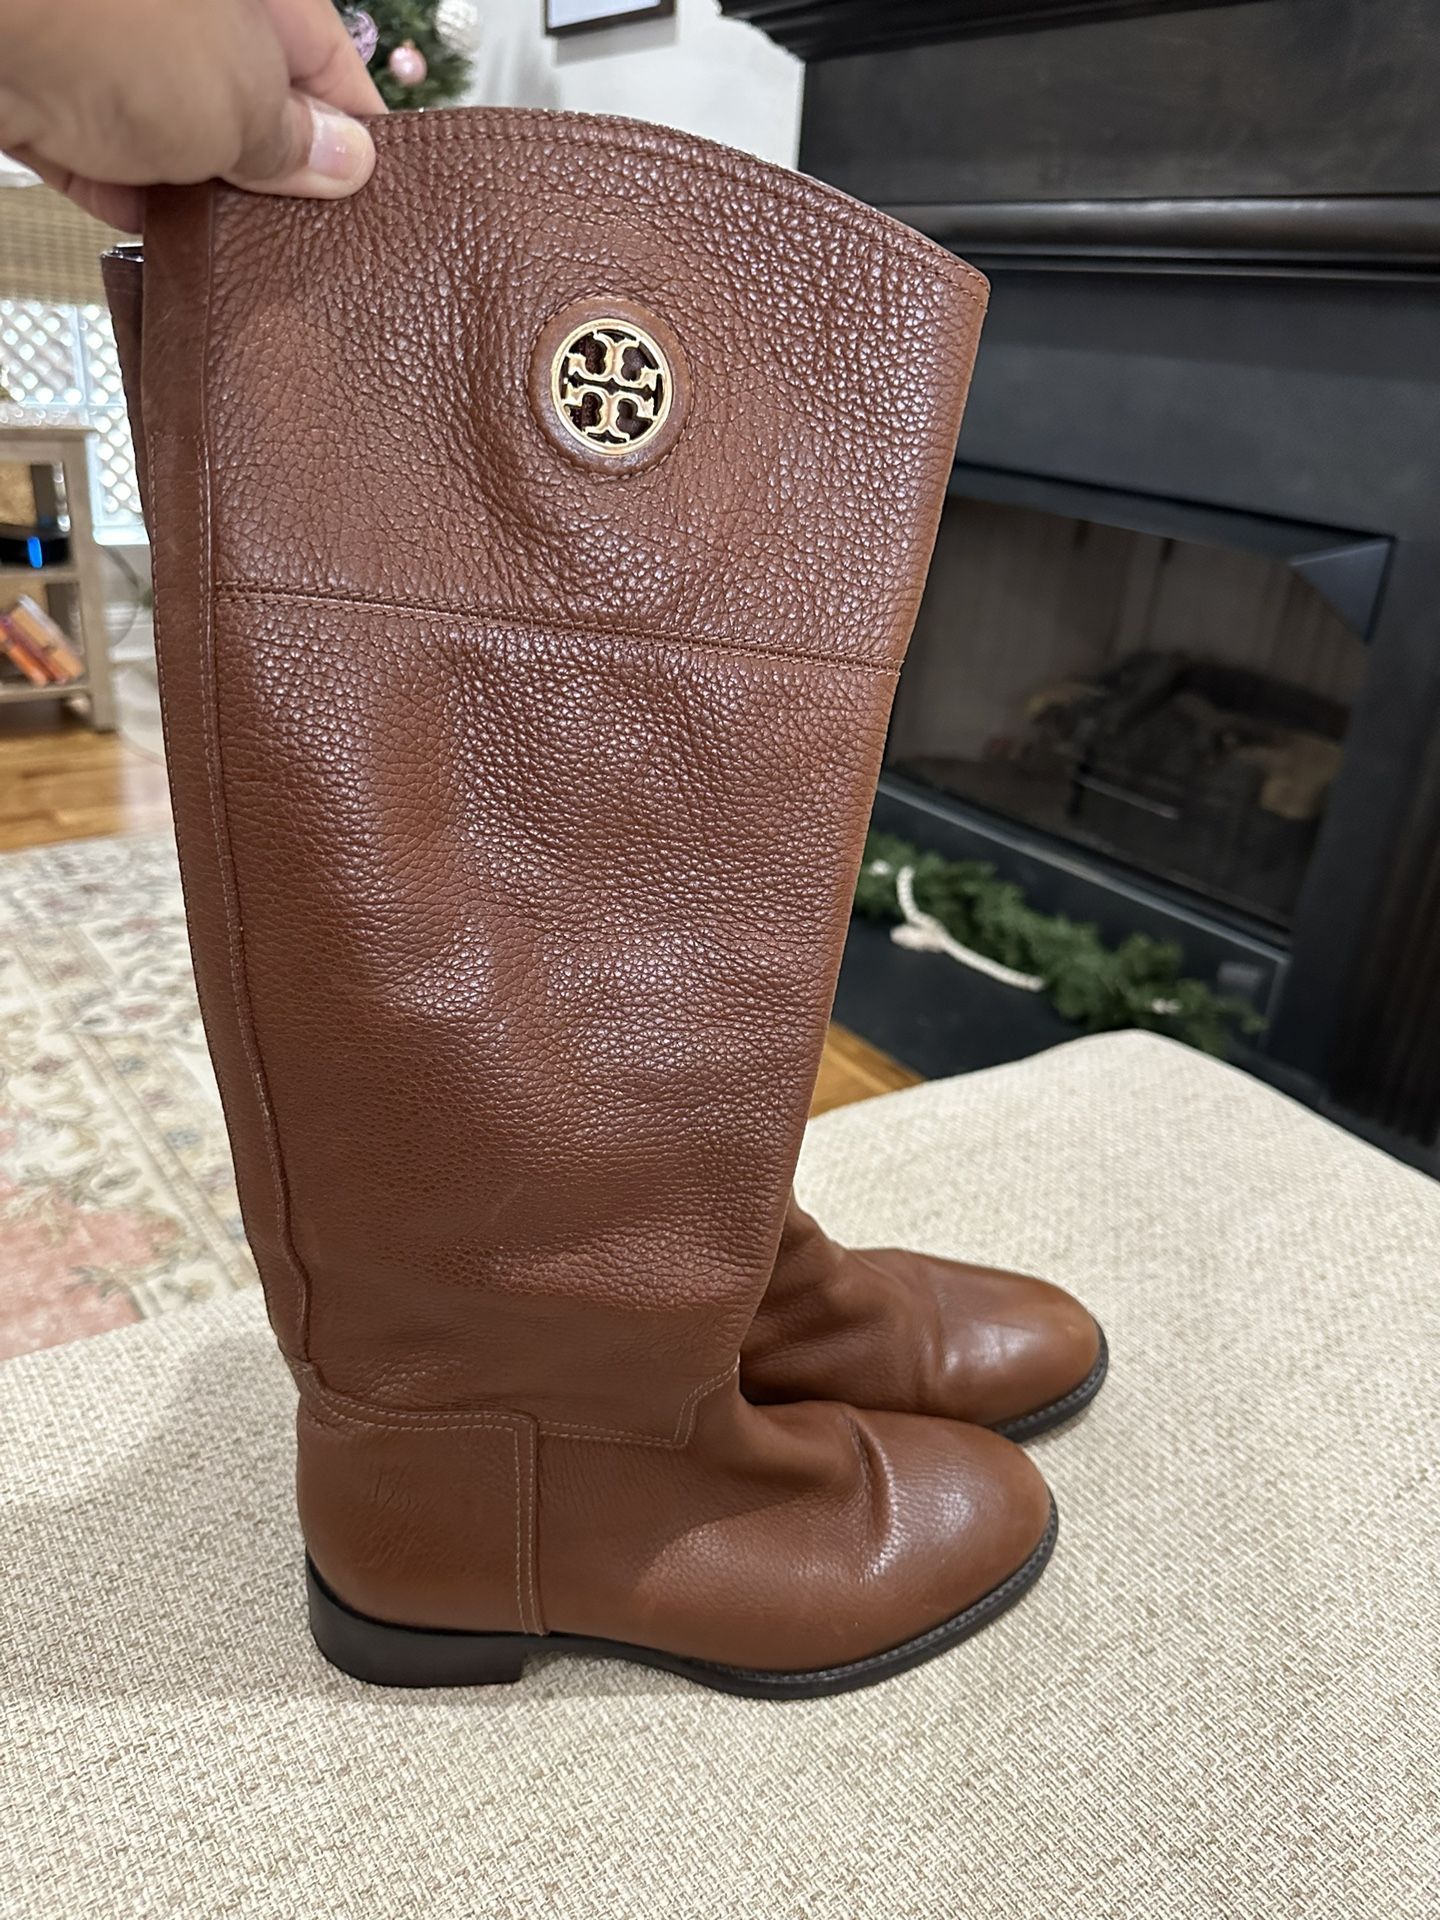 Tory Burch 71/2   UGGS  7 Slippers 